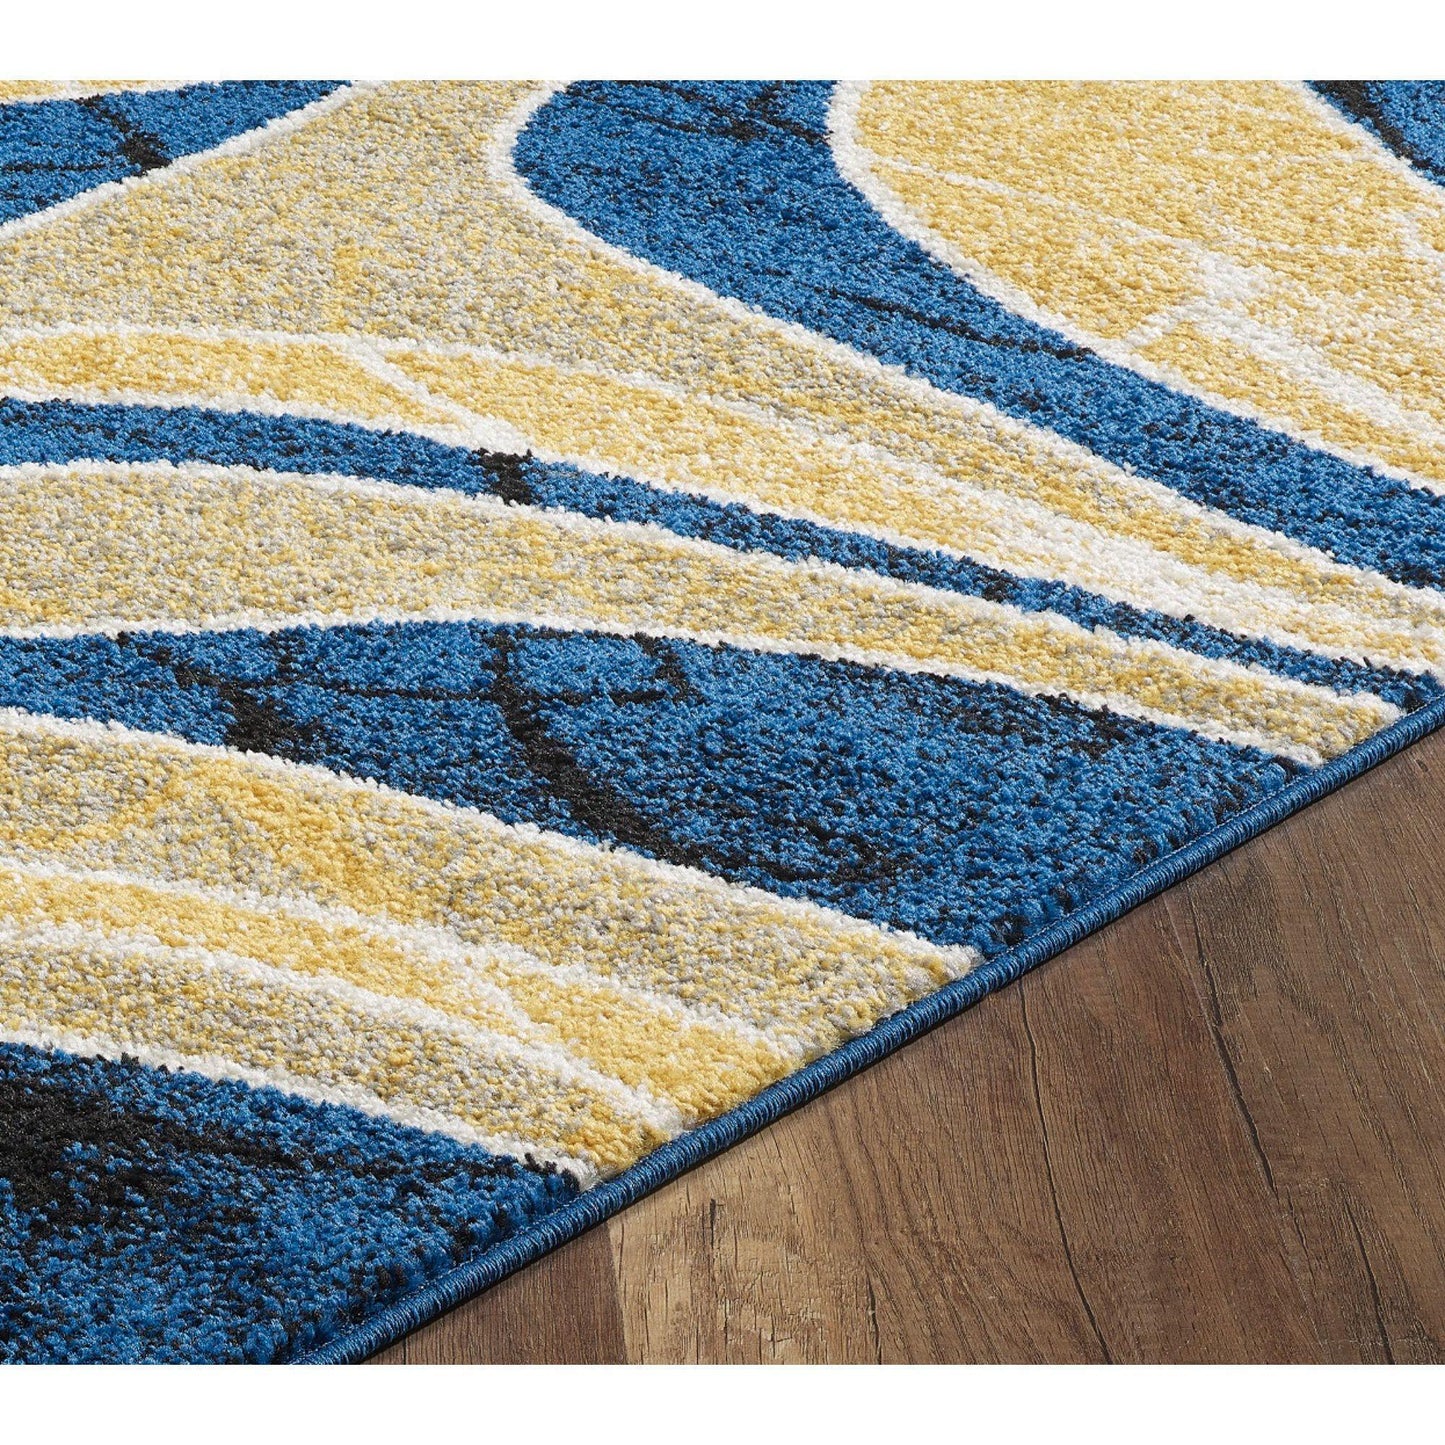 5' x 7' Yellow and Blue Graphic Rectangular Area Throw Rug